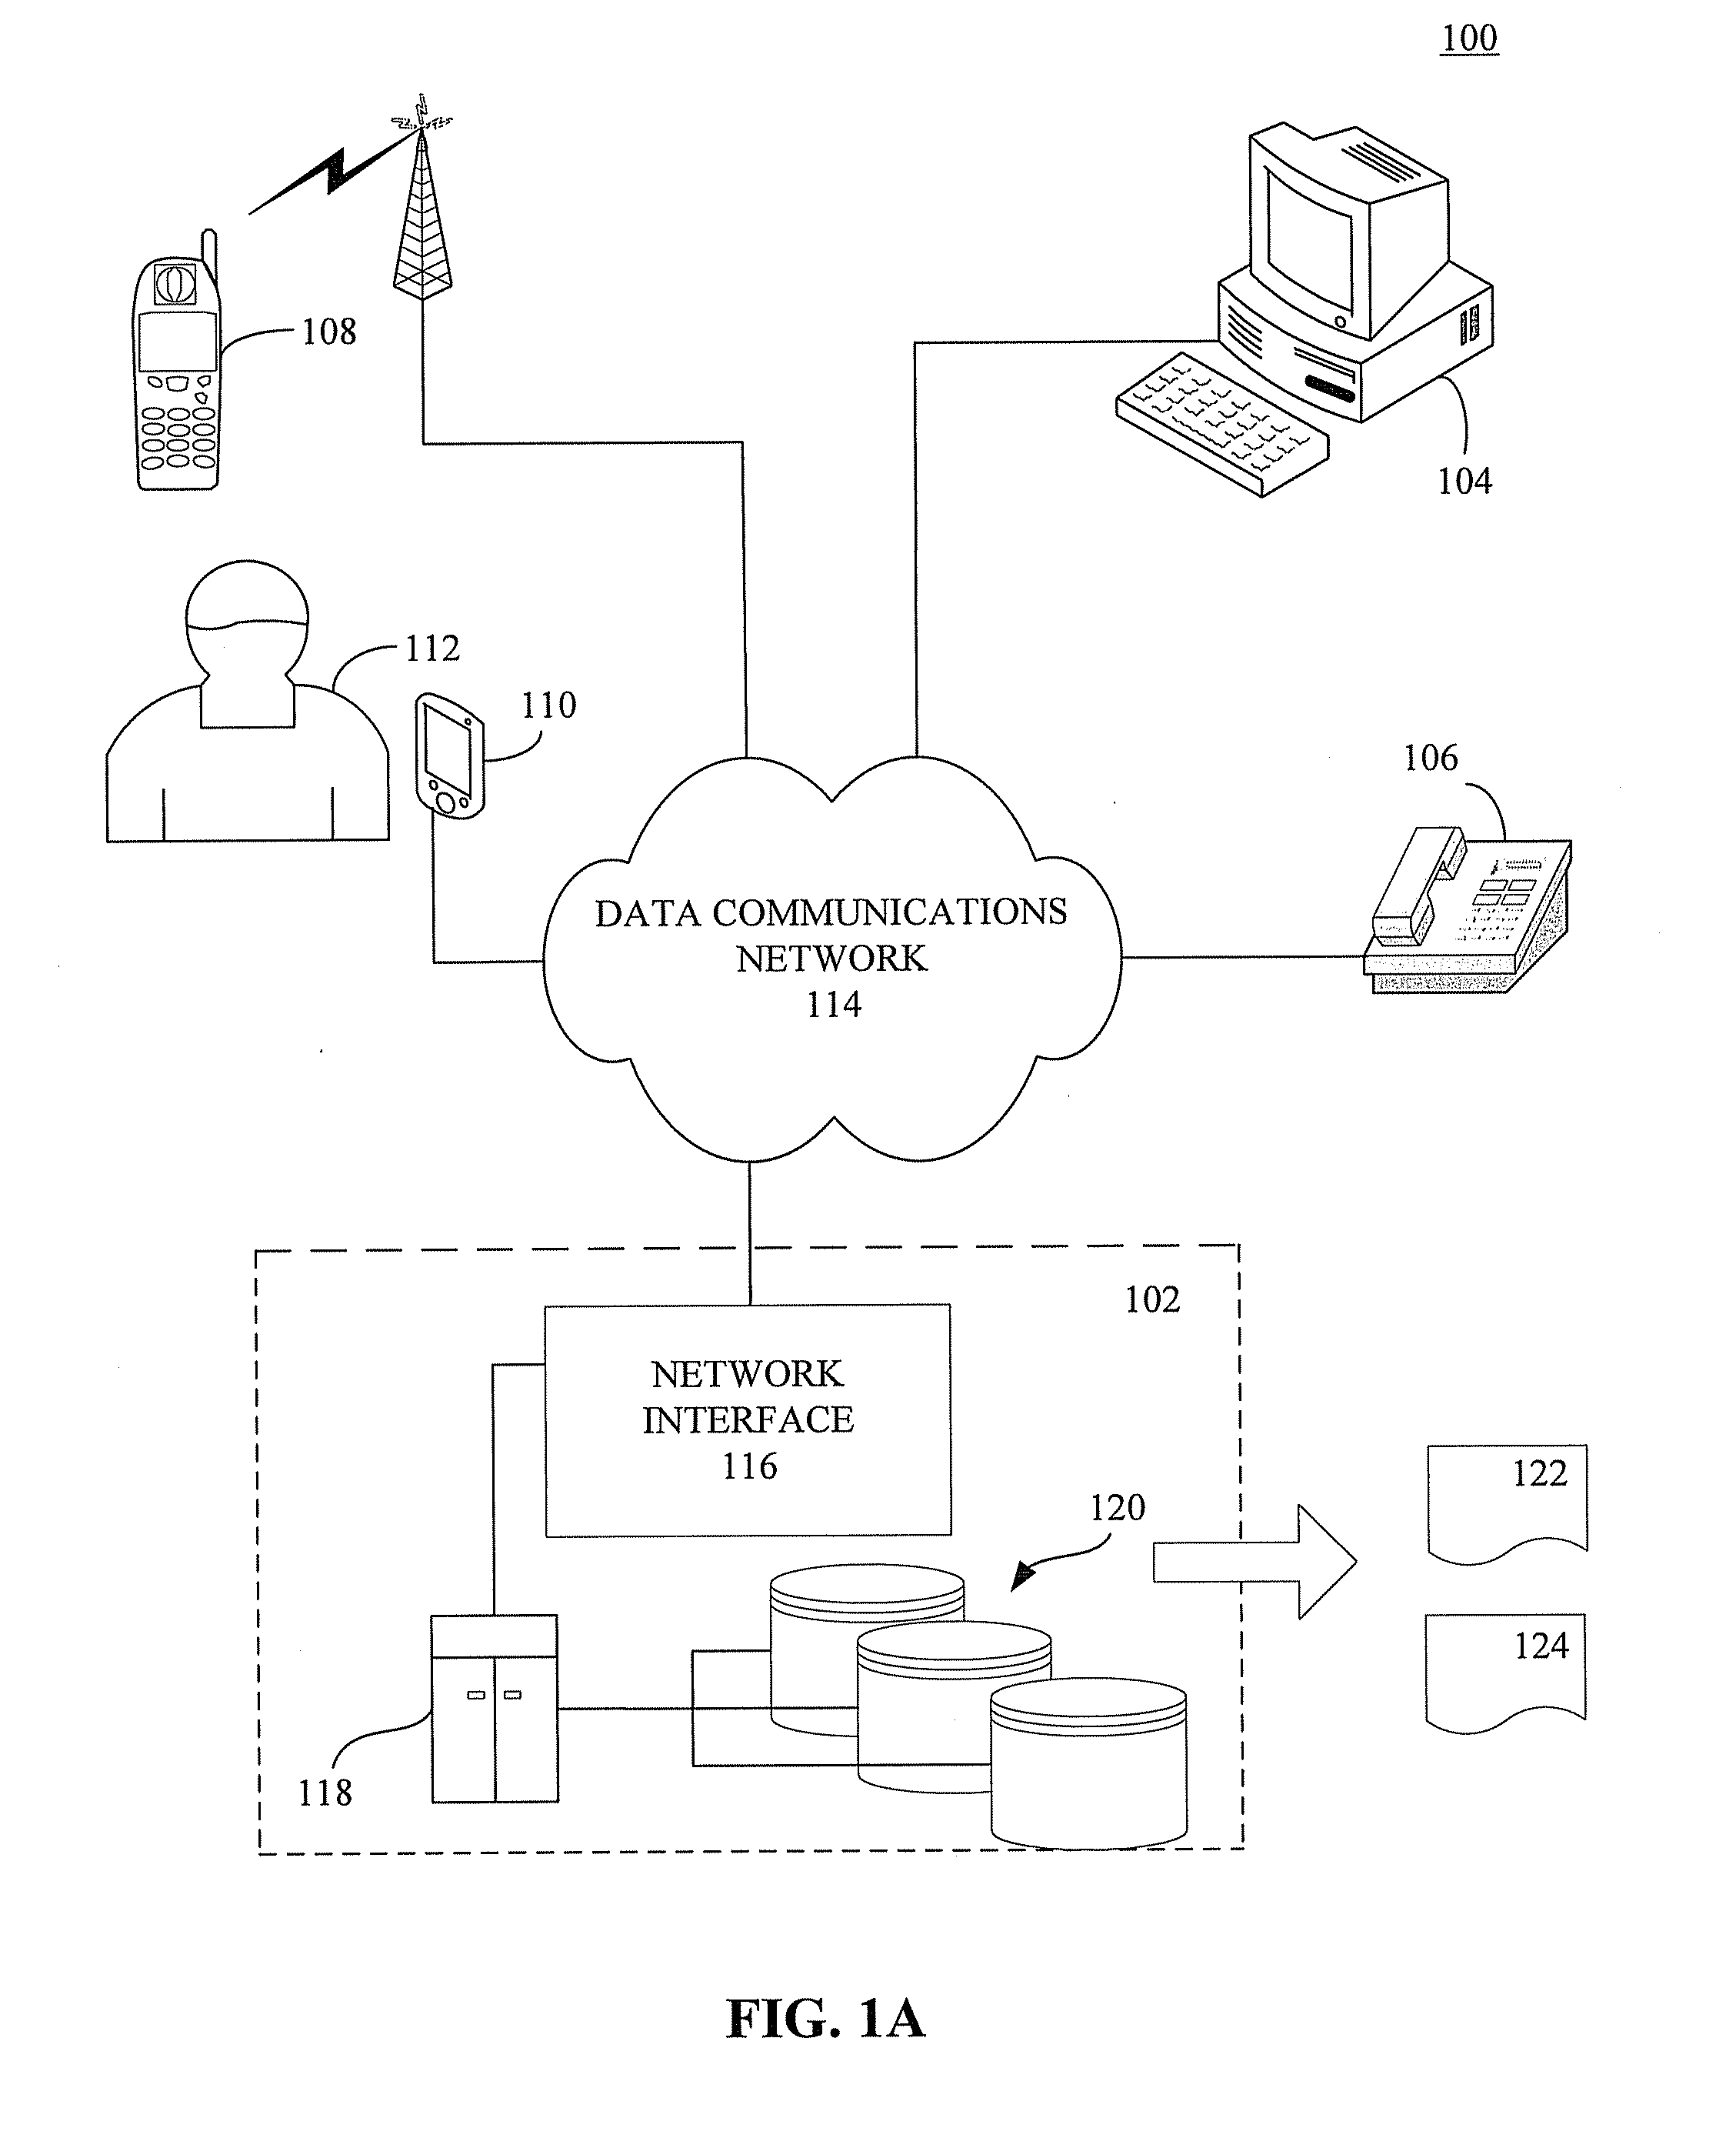 System and methods for generating pro-forma based upon input provided via a communications network